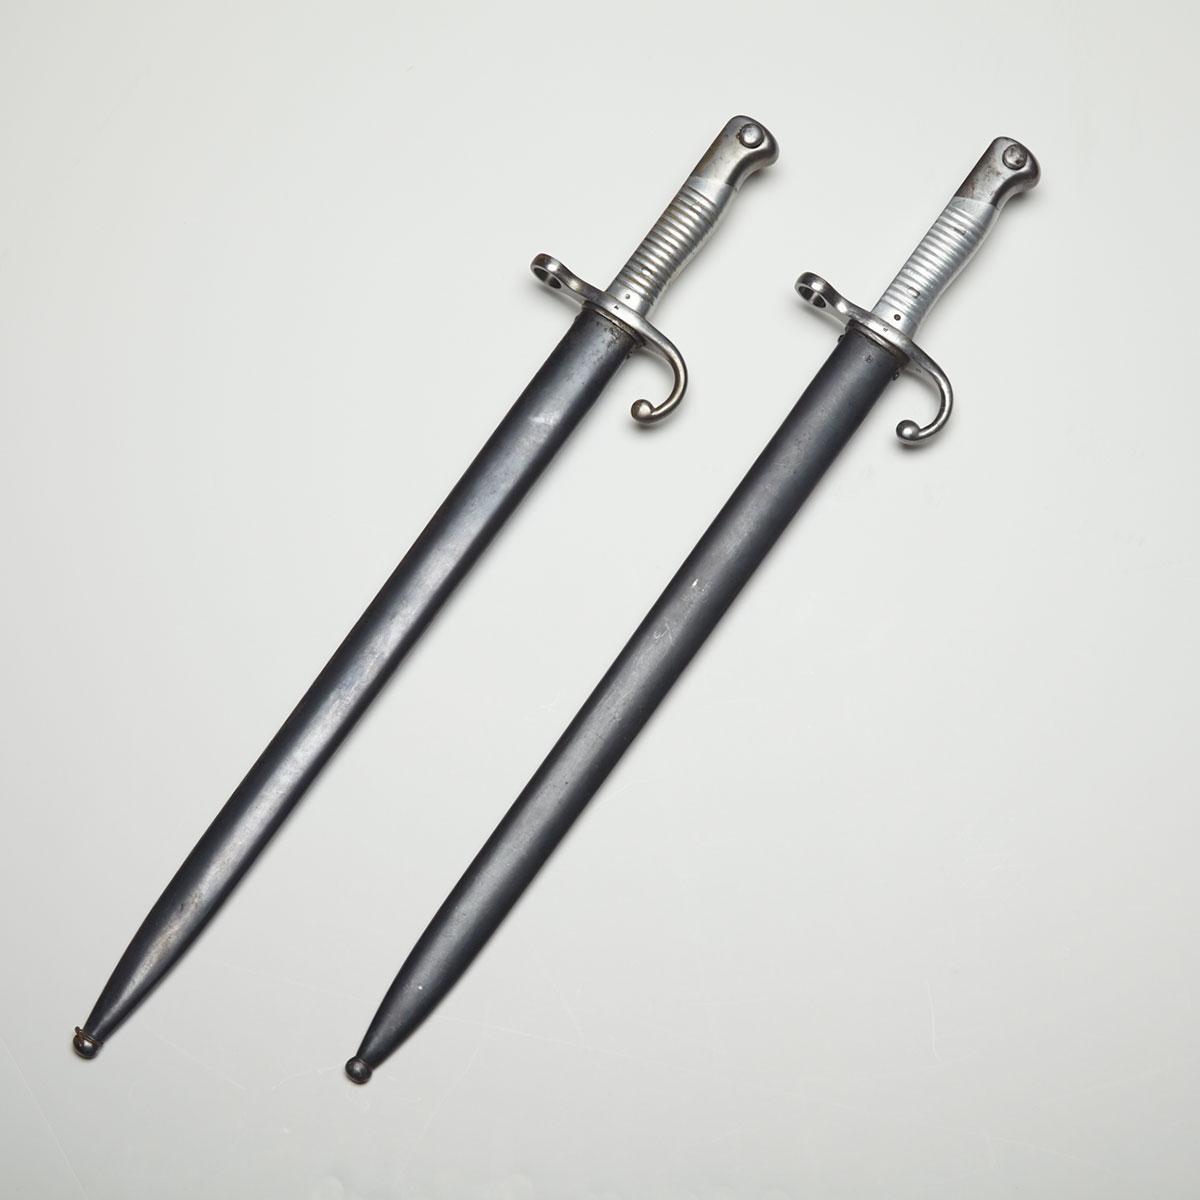 Two Argentine Model 1891 Mauser Sword Bayonets, early 20th century